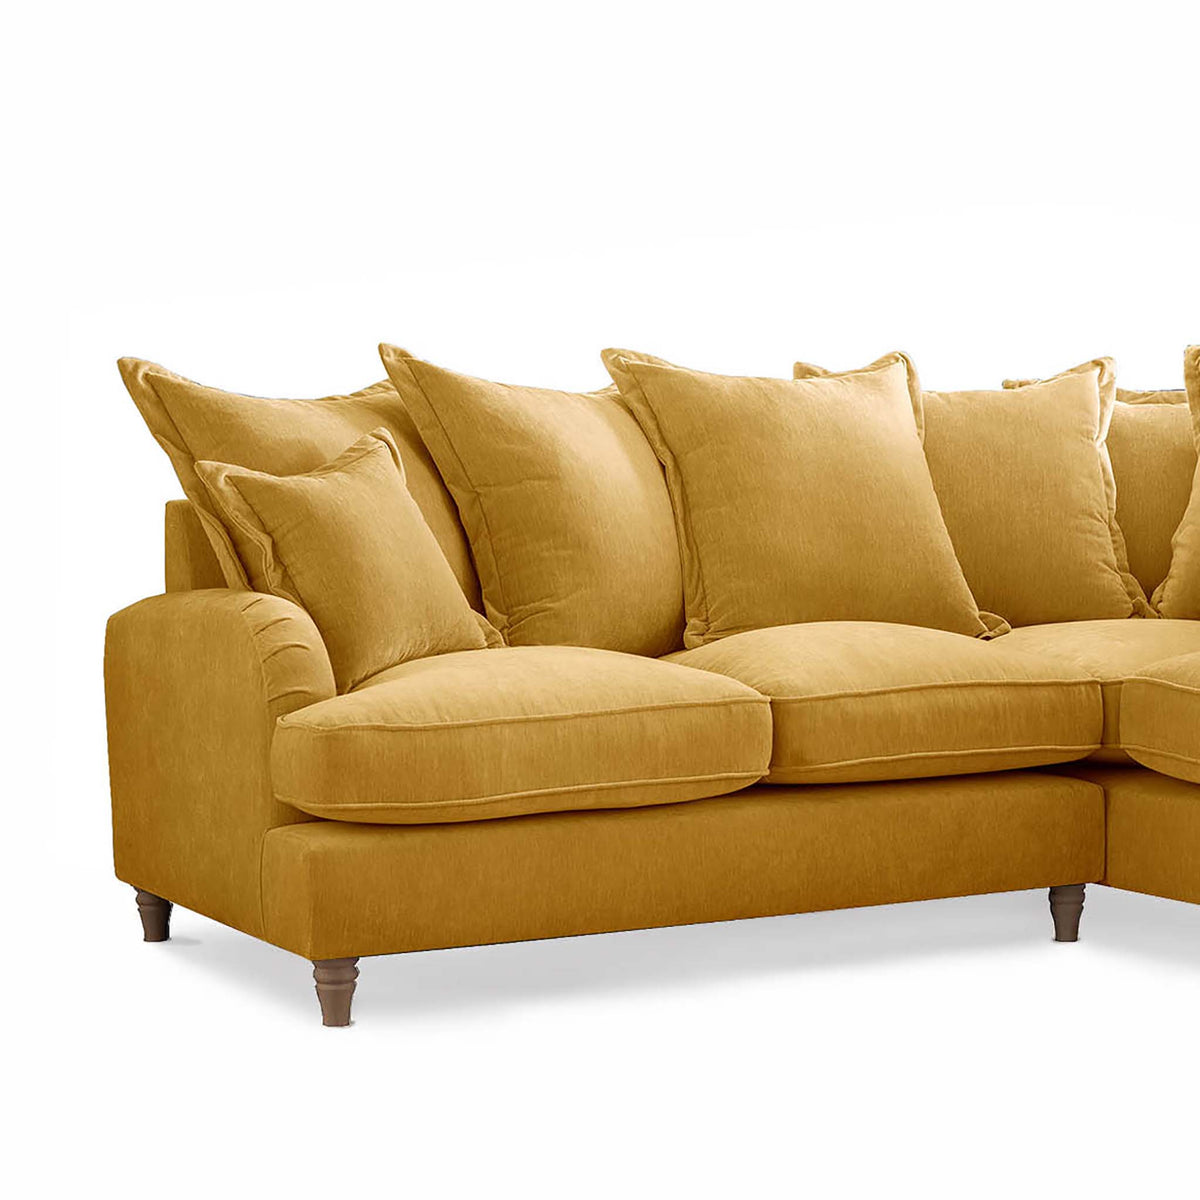 Rupert Gold 2 Corner 1 Right Hand Sofa Couch